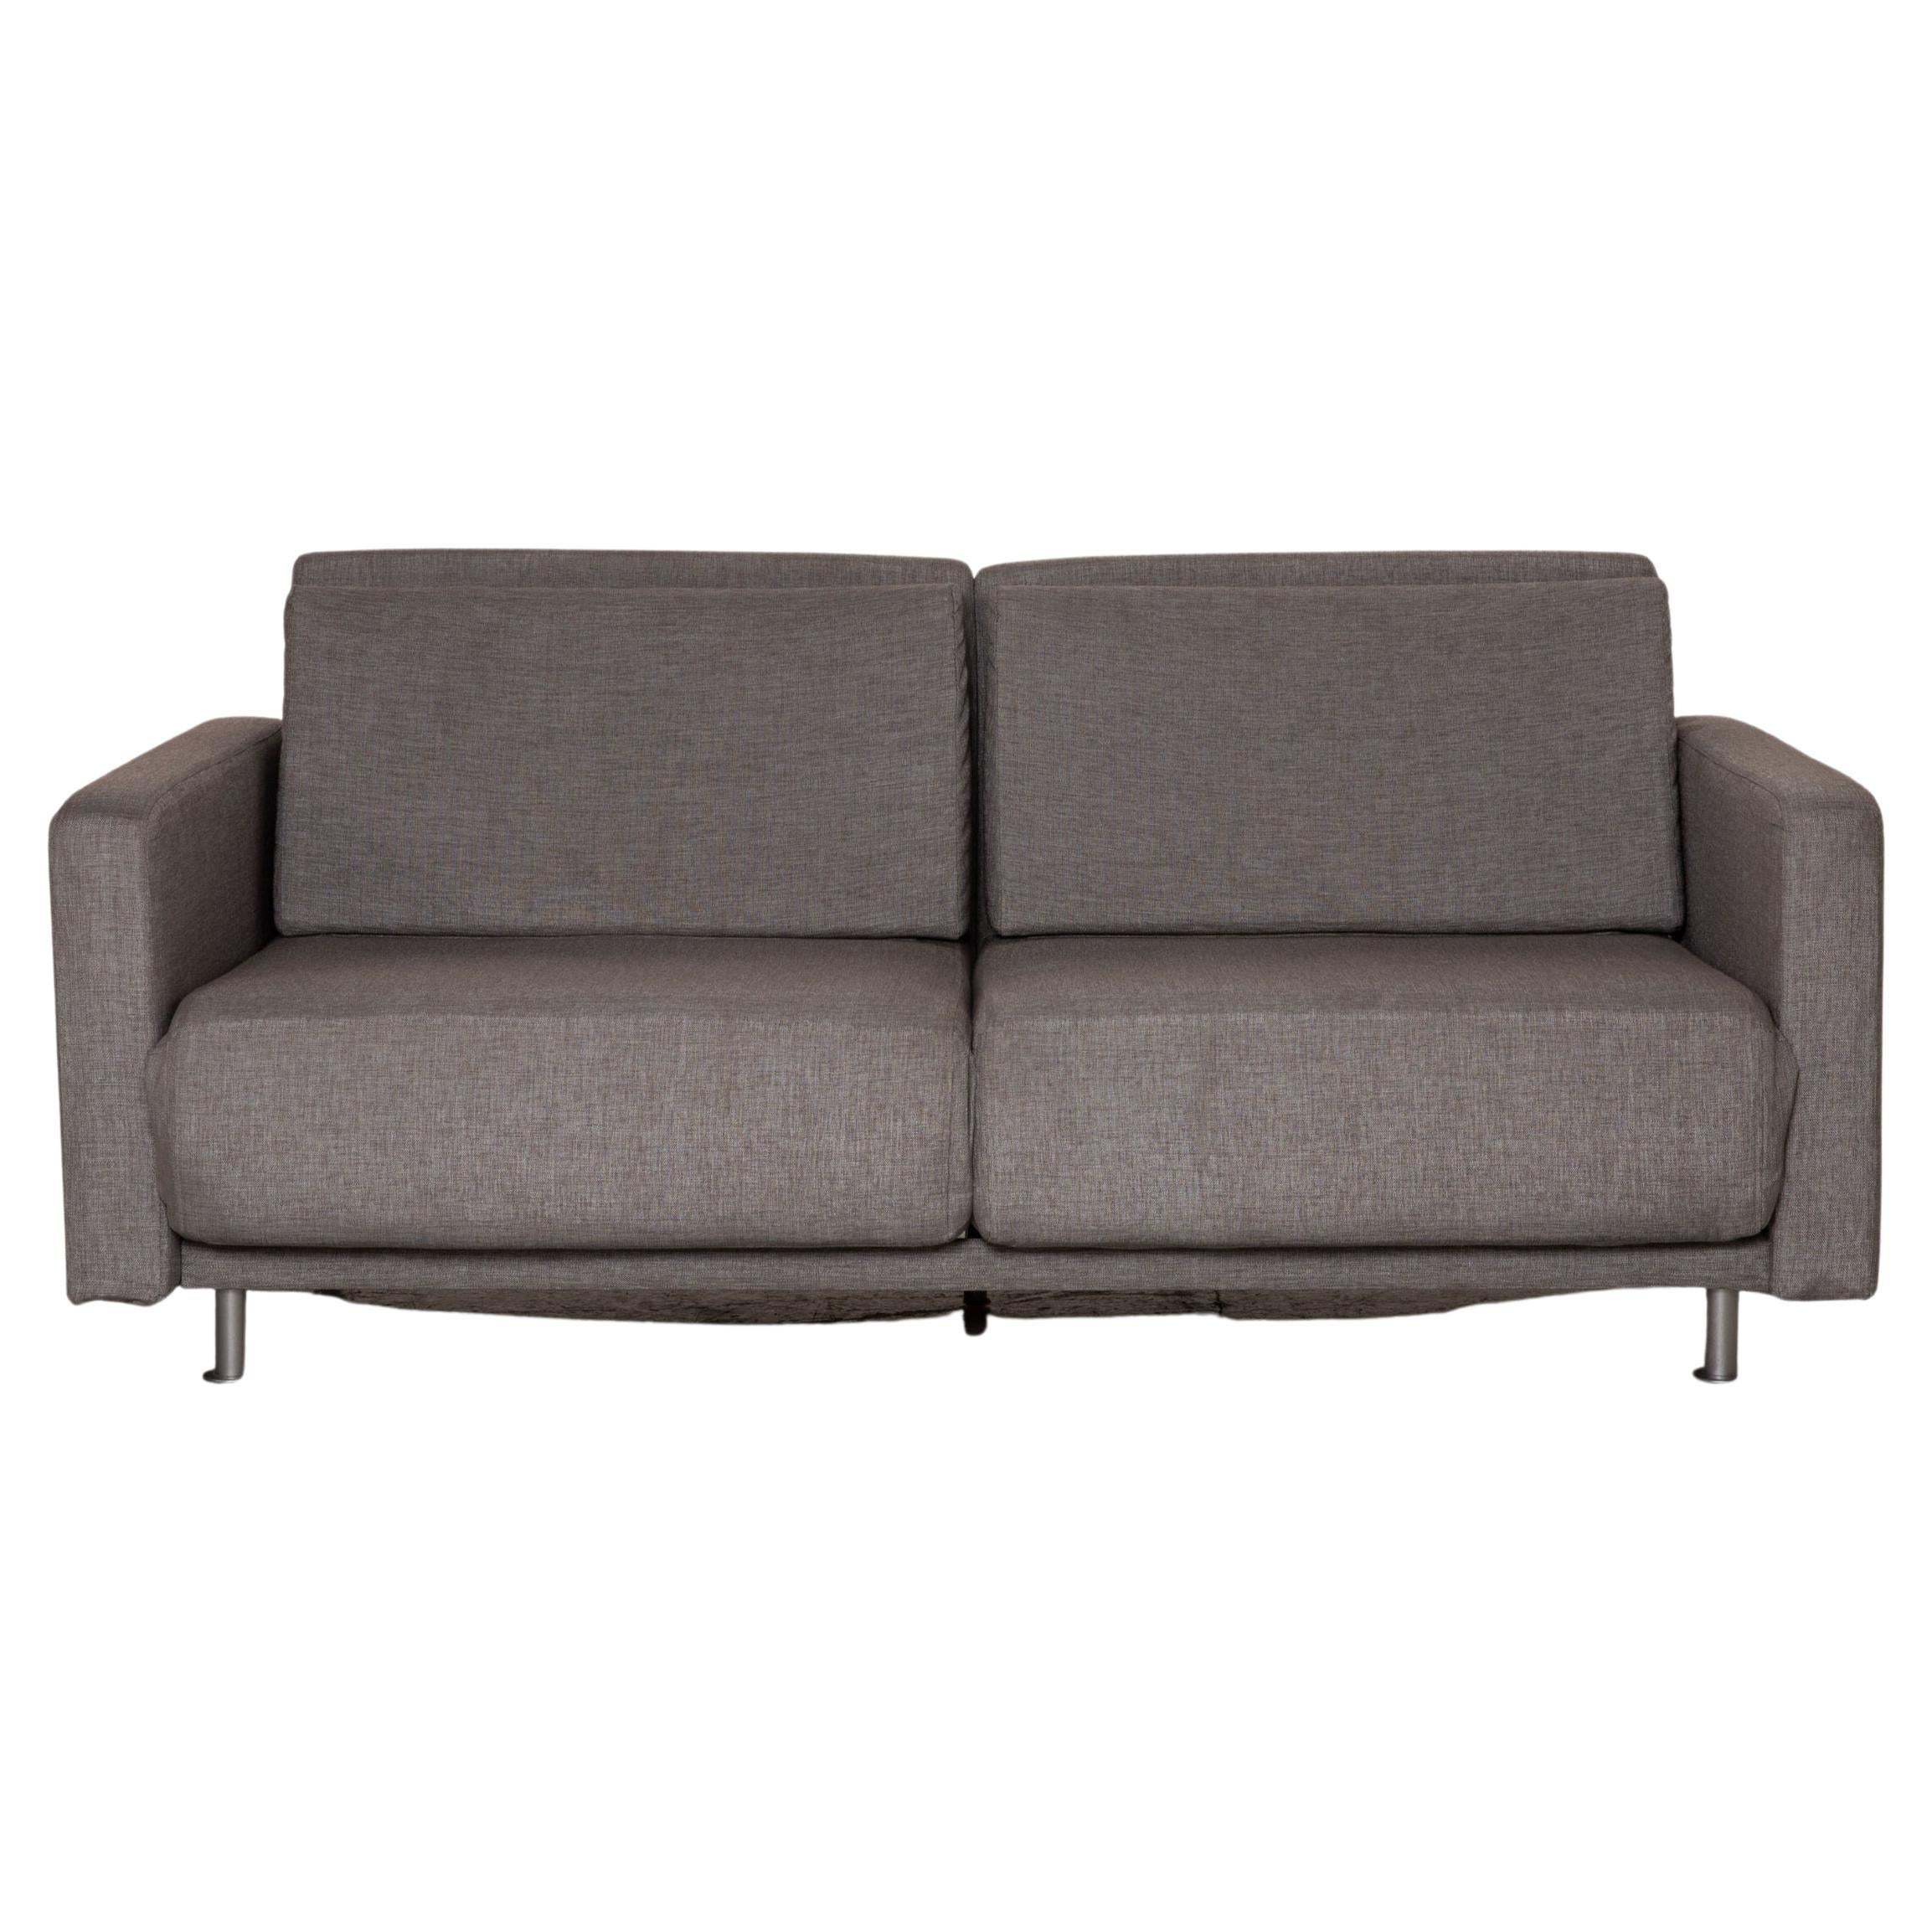 BoConcept Melo Sofa Fabric Gray Two-Seater Couch Function Sleeping Function